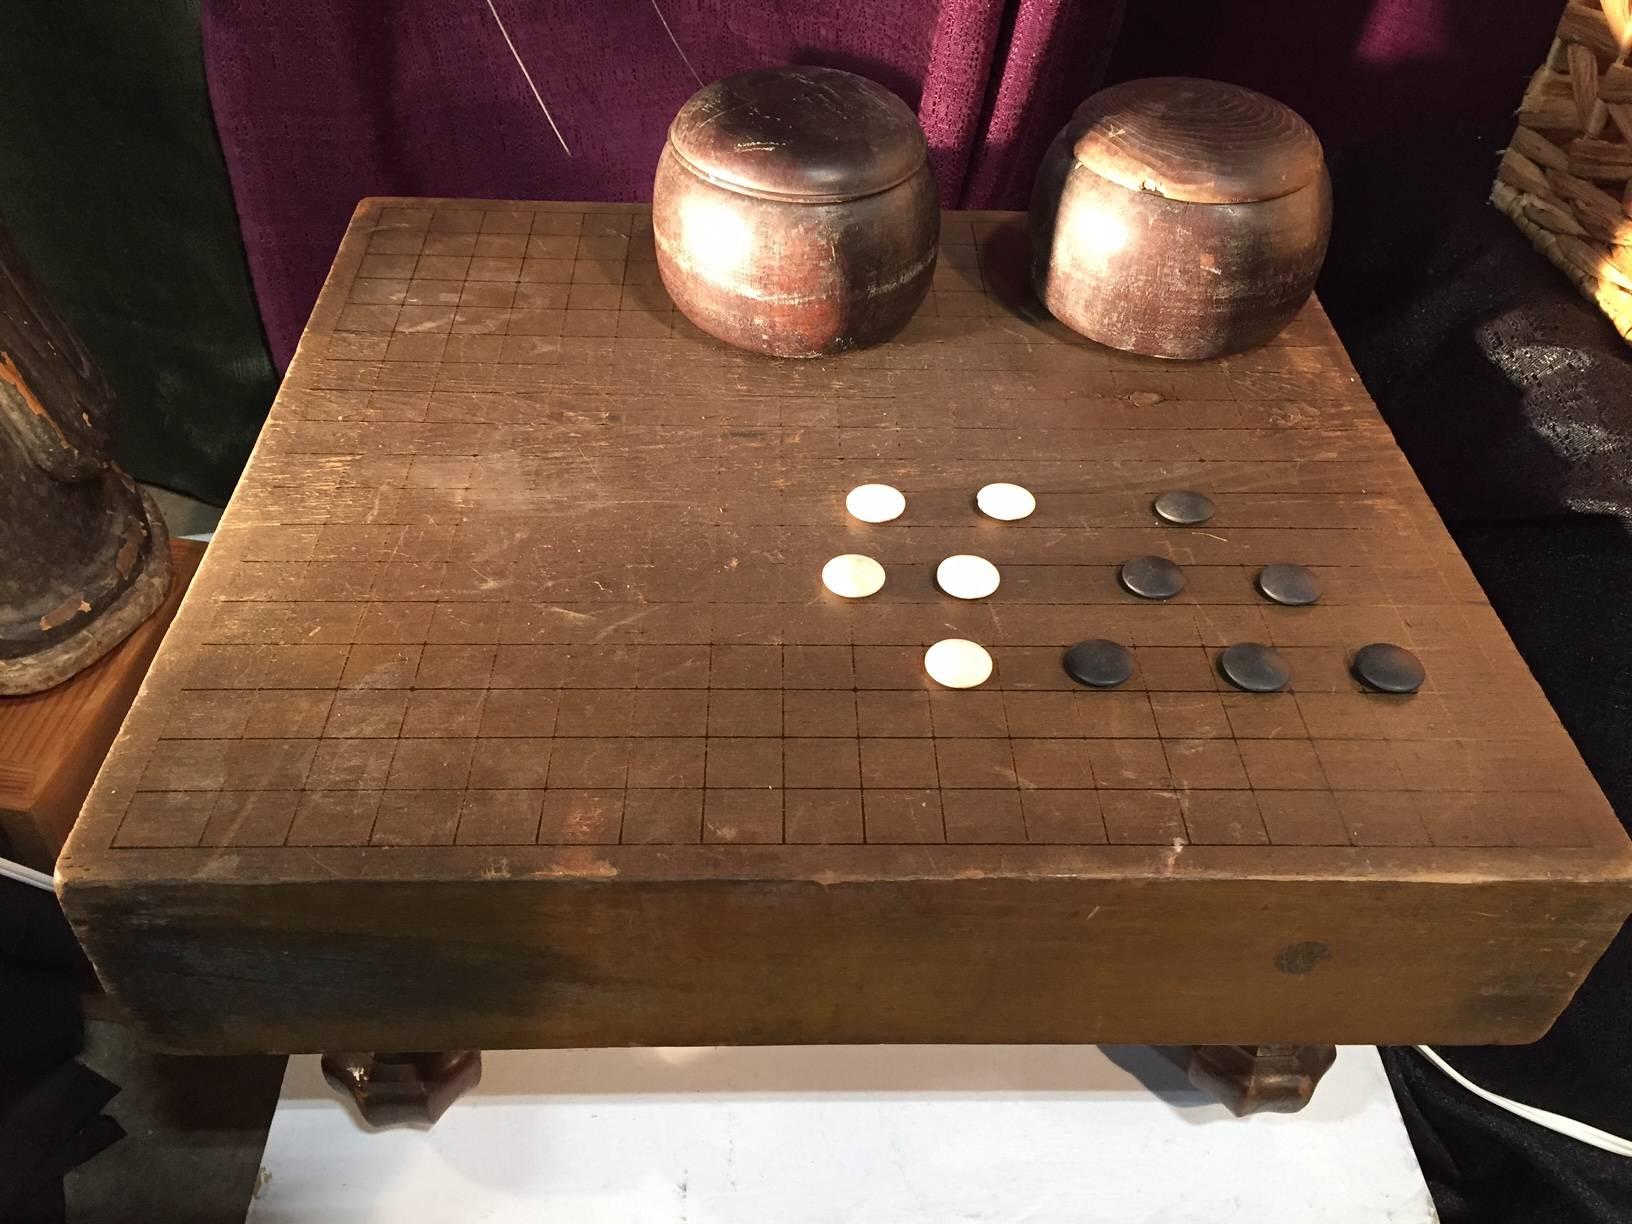 This is a scarce and fun Japanese thick, antique wooden goban “GO” board, 1920s-1930s, handcrafted of Kaya wood, 8” H x 20” W, and with a warm aged patina. It comes complete with the GO ishi stones and wood 